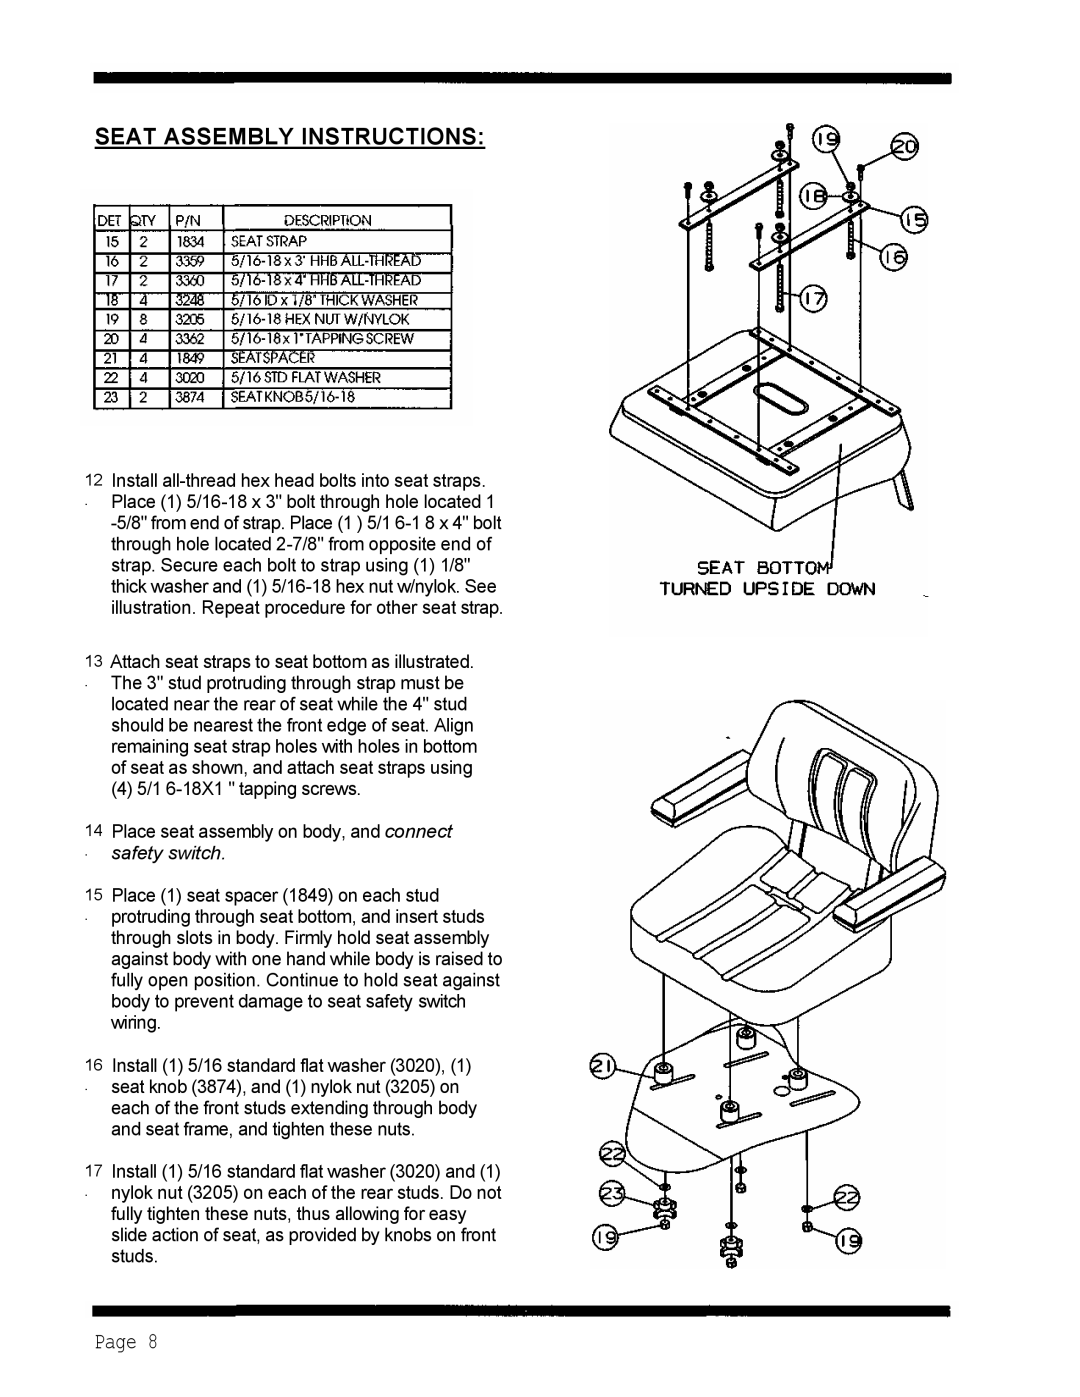 Dixon 5501 manual Seat Assembly Instructions, Page, safety switch 